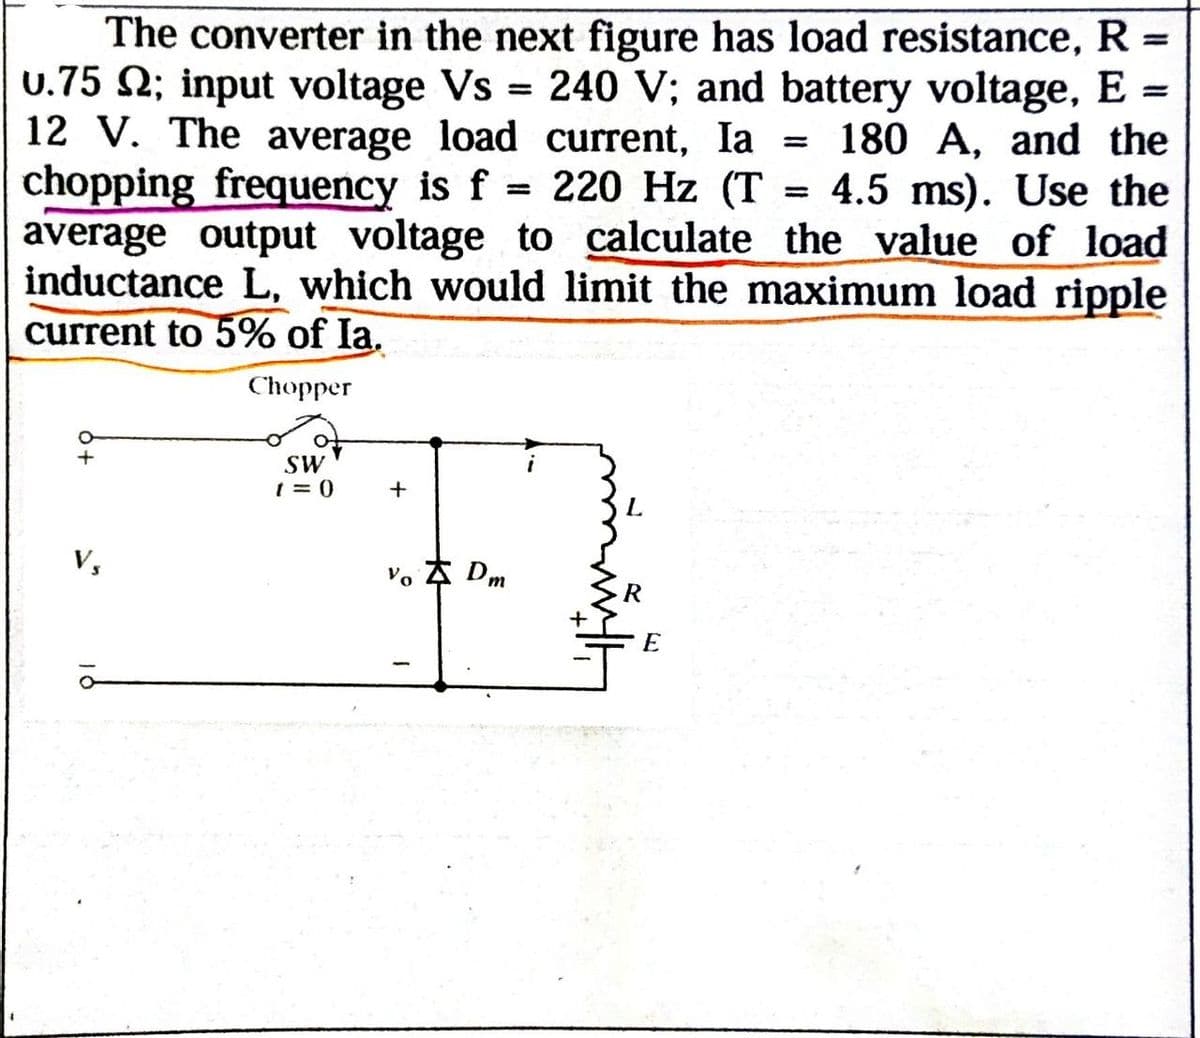 =
The converter in the next figure has load resistance, R =
U.75 2; input voltage Vs = 240 V; and battery voltage, E =
12 V. The average load current, Ia 180 A, and the
chopping frequency is f = 220 Hz (T = 4.5 ms). Use the
average output voltage to calculate the value of load
inductance L, which would limit the maximum load ripple
current to 5% of Ia.
°
+
Vs
Chopper
SW
t=0
+
Vo Dm
E